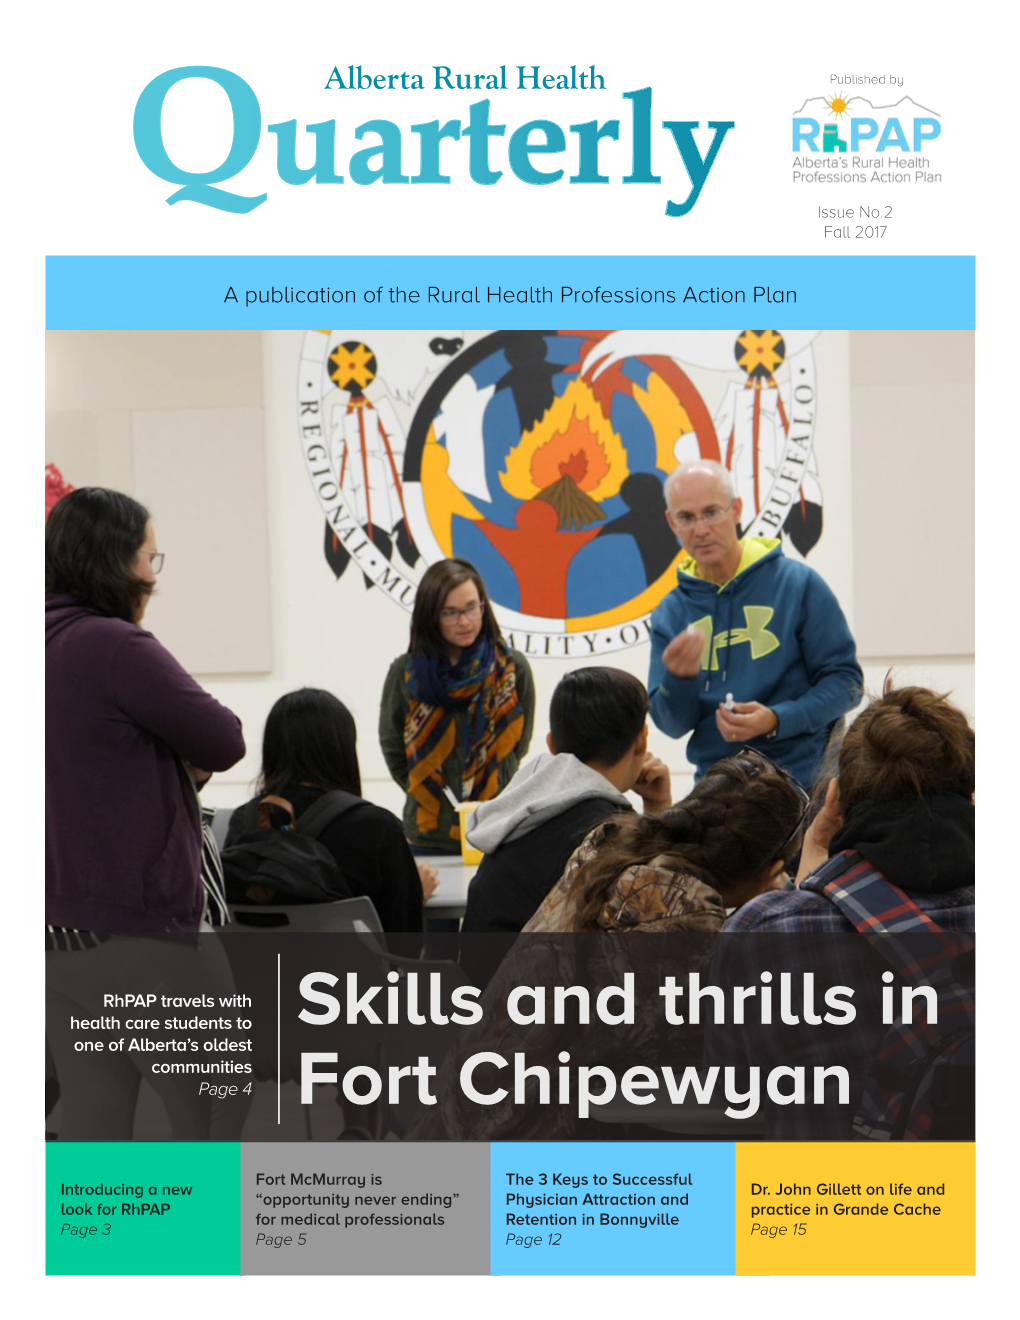 Skills and Thrills in Fort Chipewyan